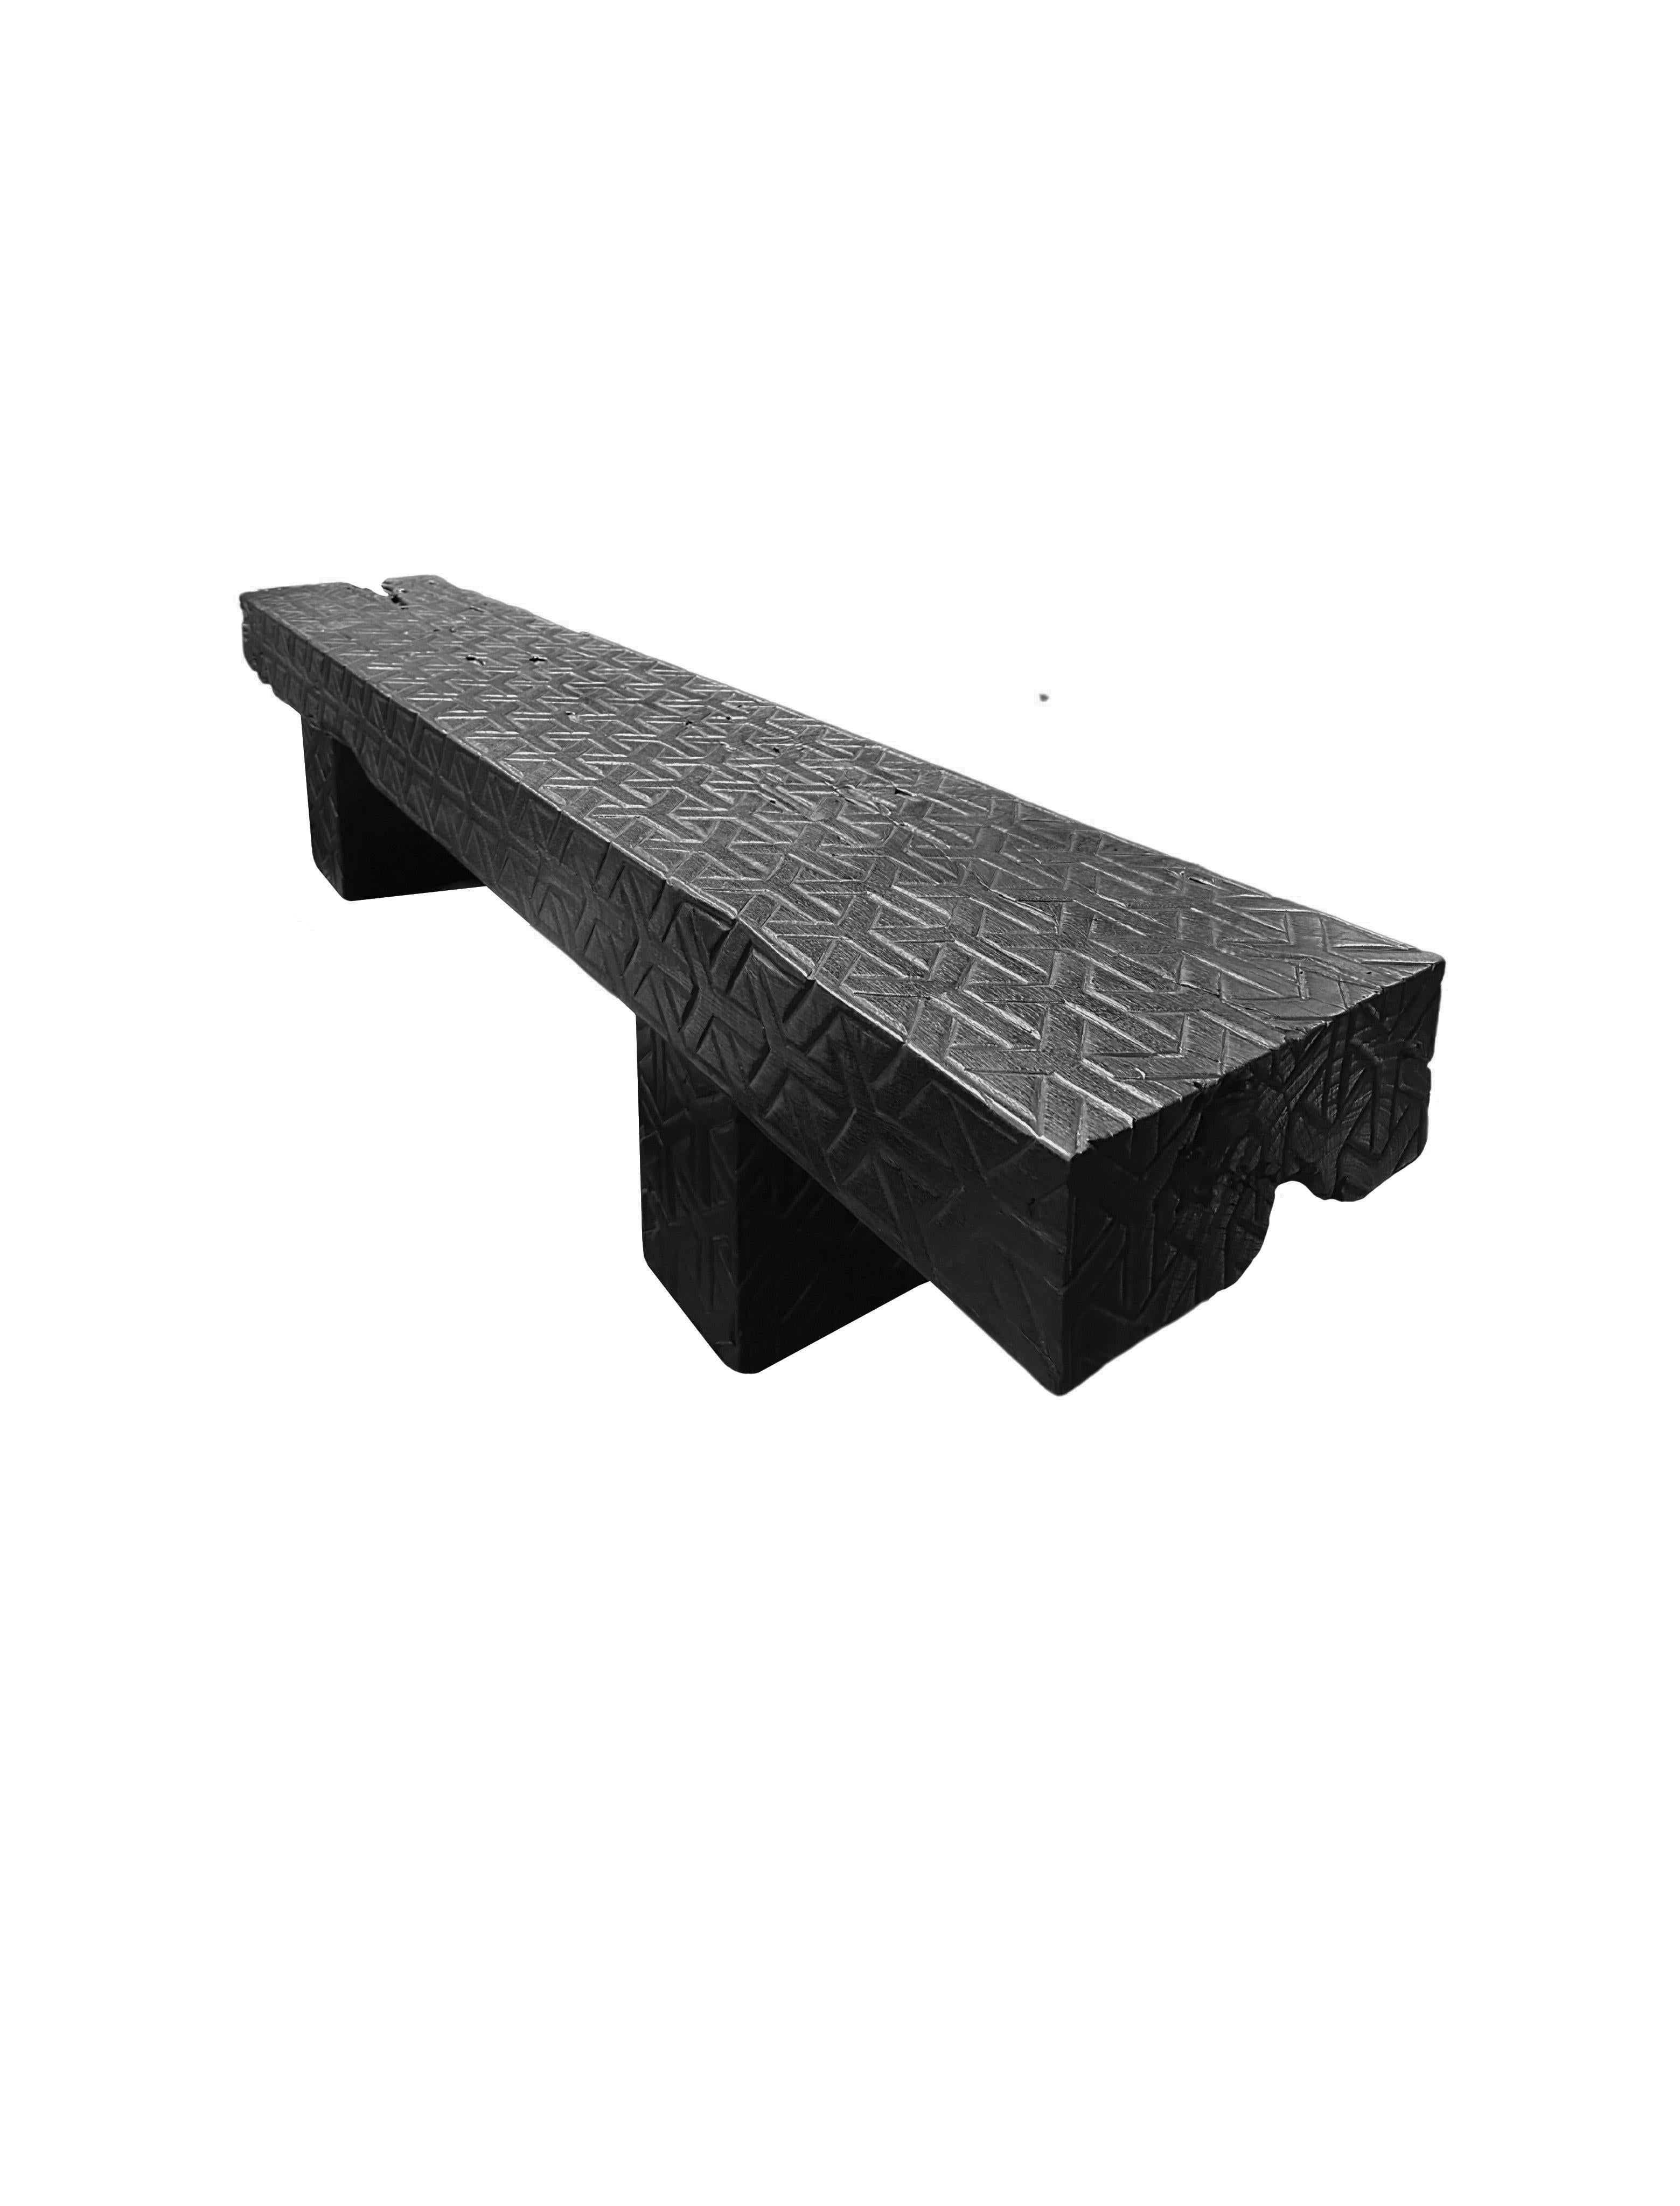 A sculptural hand-carved mango wood bench. To achieve is rich black pigment the bench was burnt three times and then finished with a clear coat. Unique to this bench is the hand carved detailing present on all sides. This carved dealing is meant to